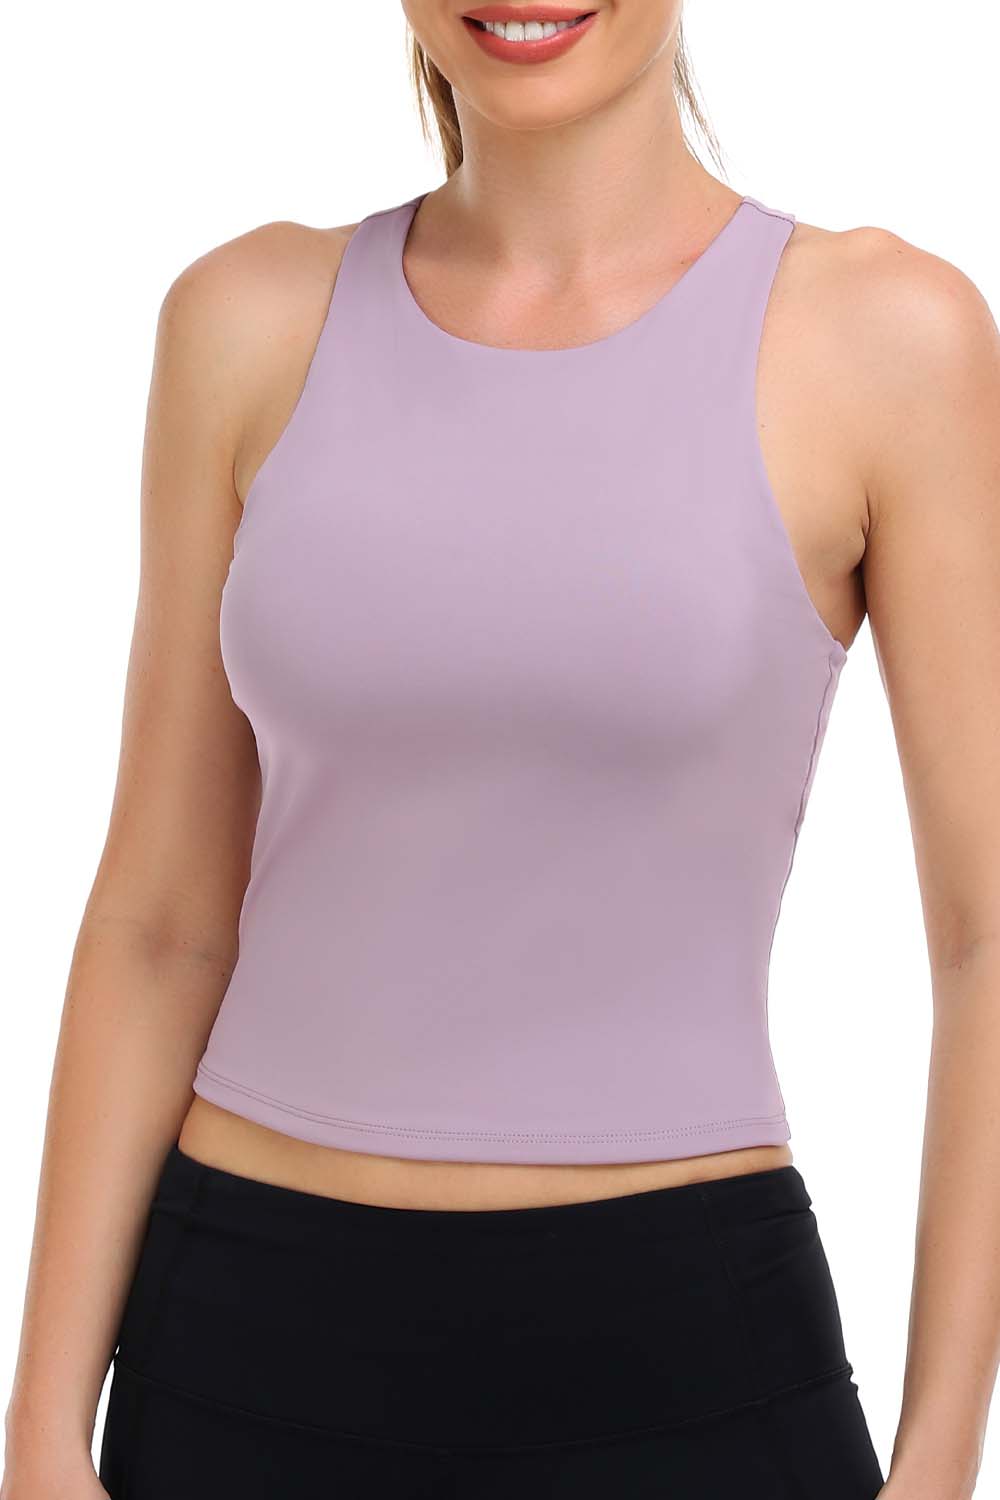 90 Degree By Reflex - Women's Ribbed Cropped Tank Top With Padded